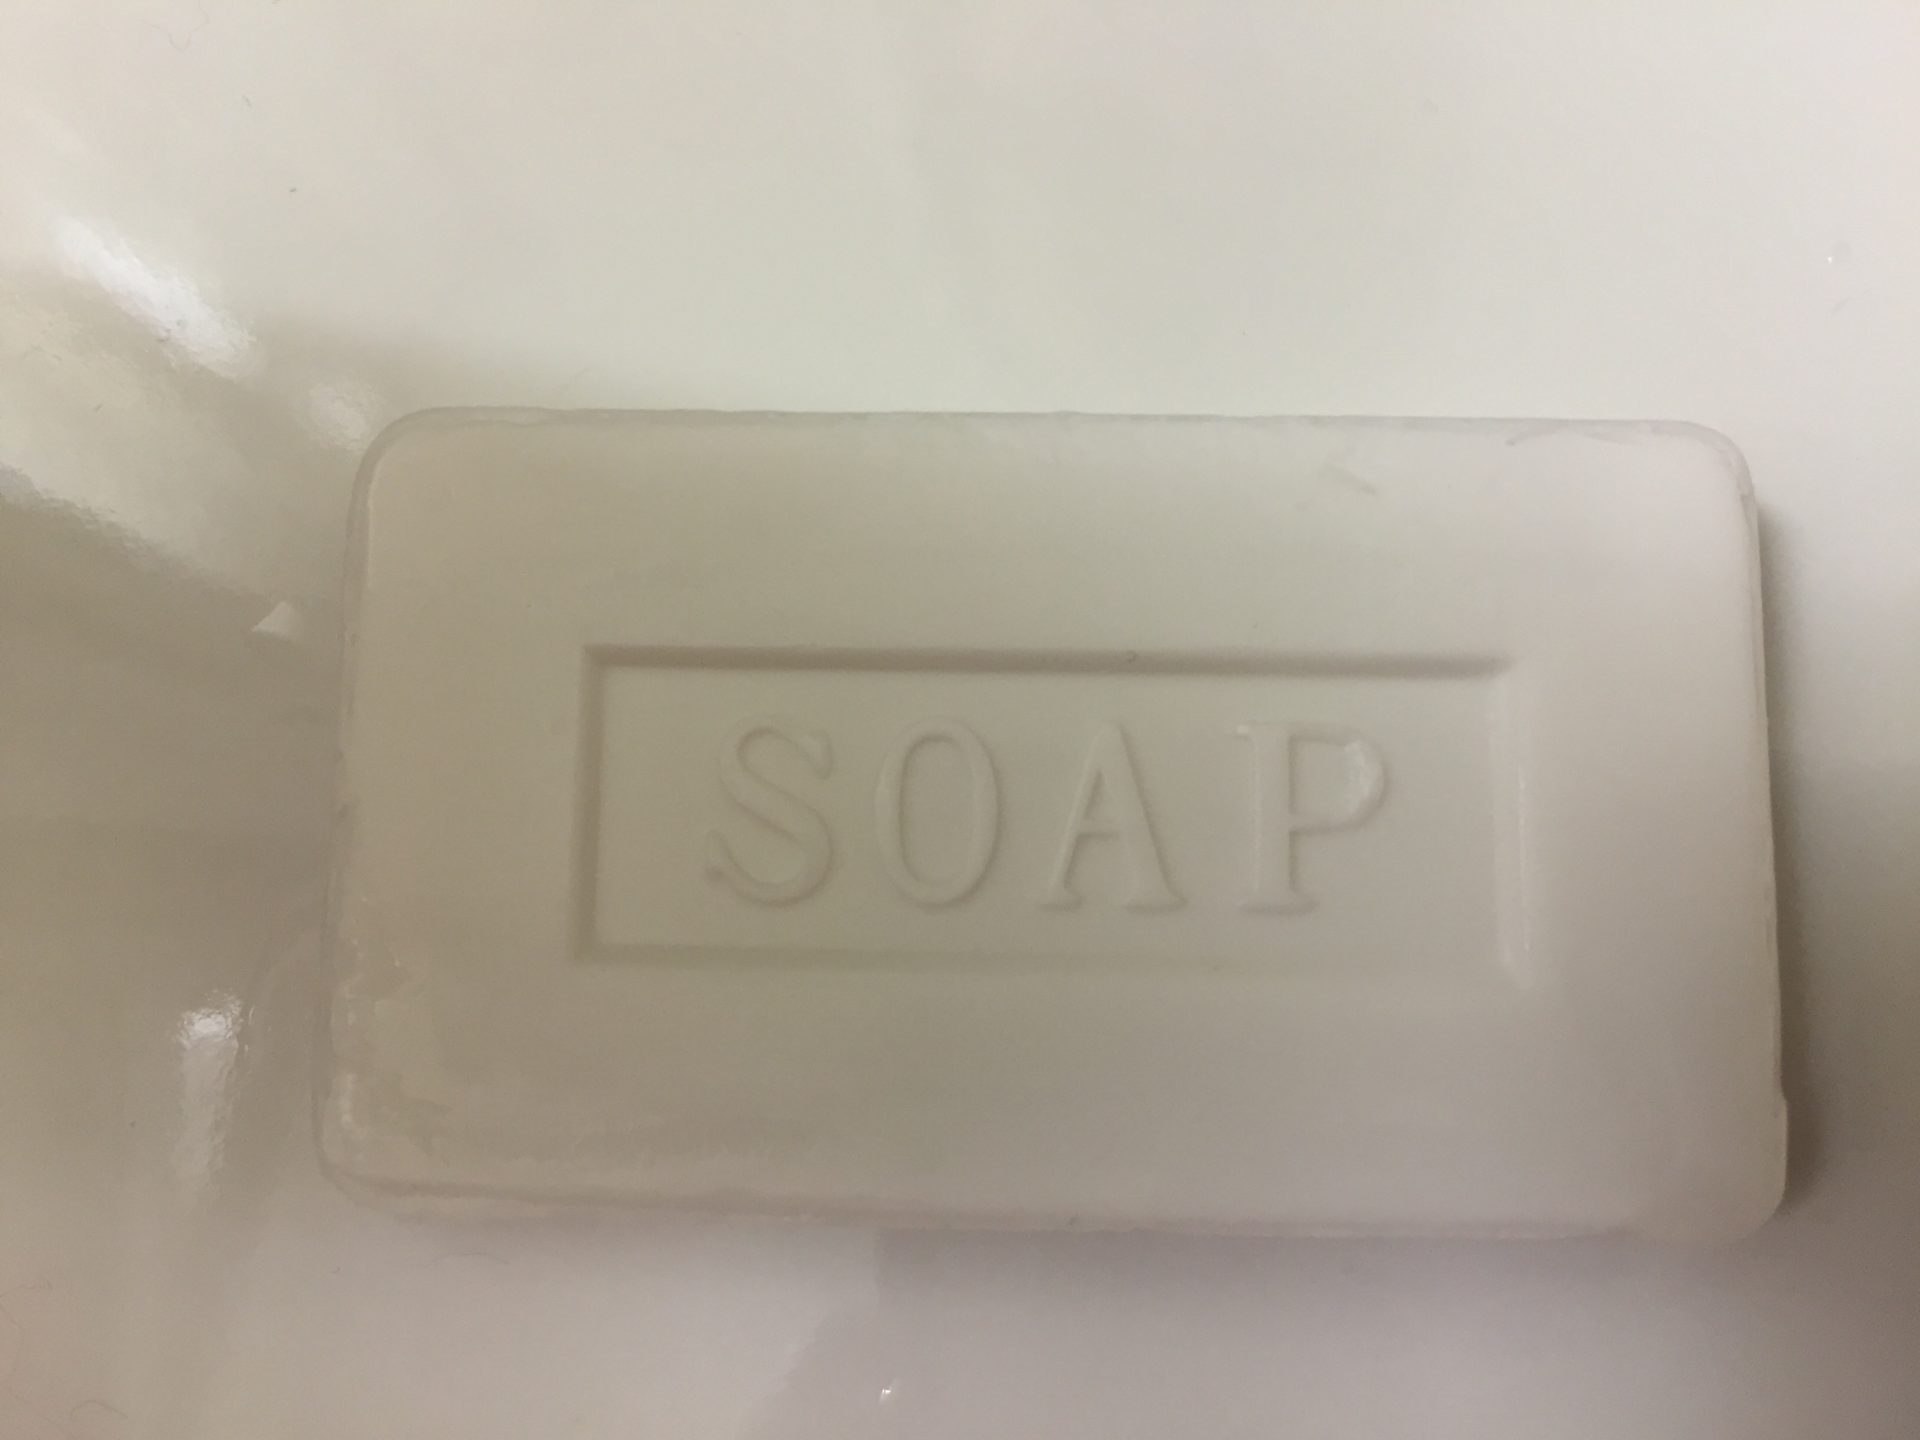 a bar of soap on a white surface